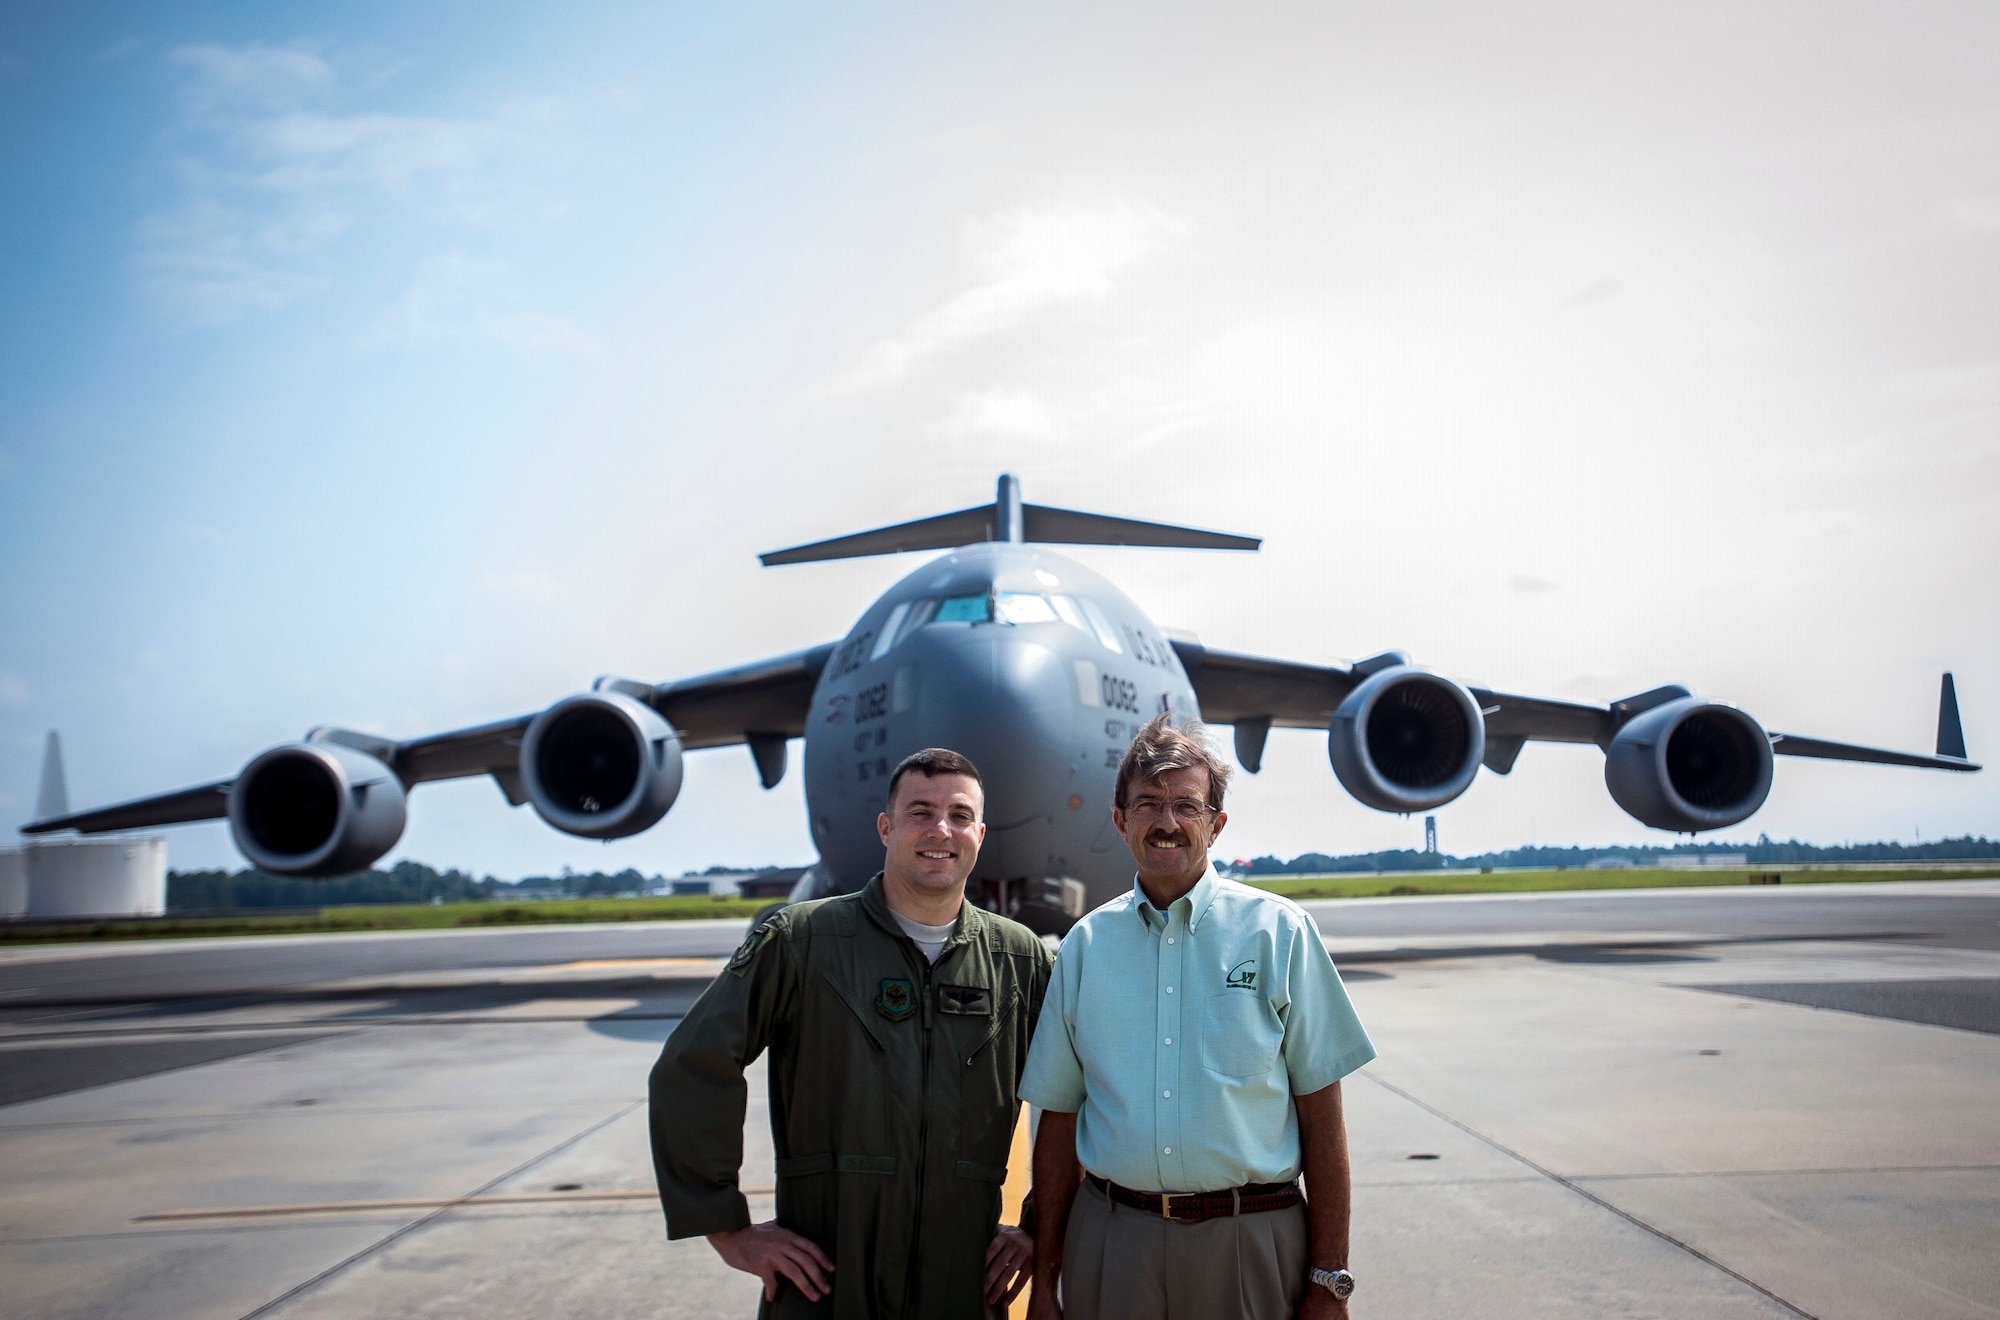 Tech. Sgt. Mike Morris, 437th Airlift Wing Operations Group standards and evaluations loadmaster, enjoys a stroll on the flight line with his father, ret. Chief Master Sgt. Bob Morris, C-17 Training Systems Charleston lead loadmaster, Sept. 17, 2013 at Joint Base Charleston – Air Base, S.C. Bob is a retired loadmaster and was on the plane for the arrival of the first C-17 delivered to the Air Force in June 1993.